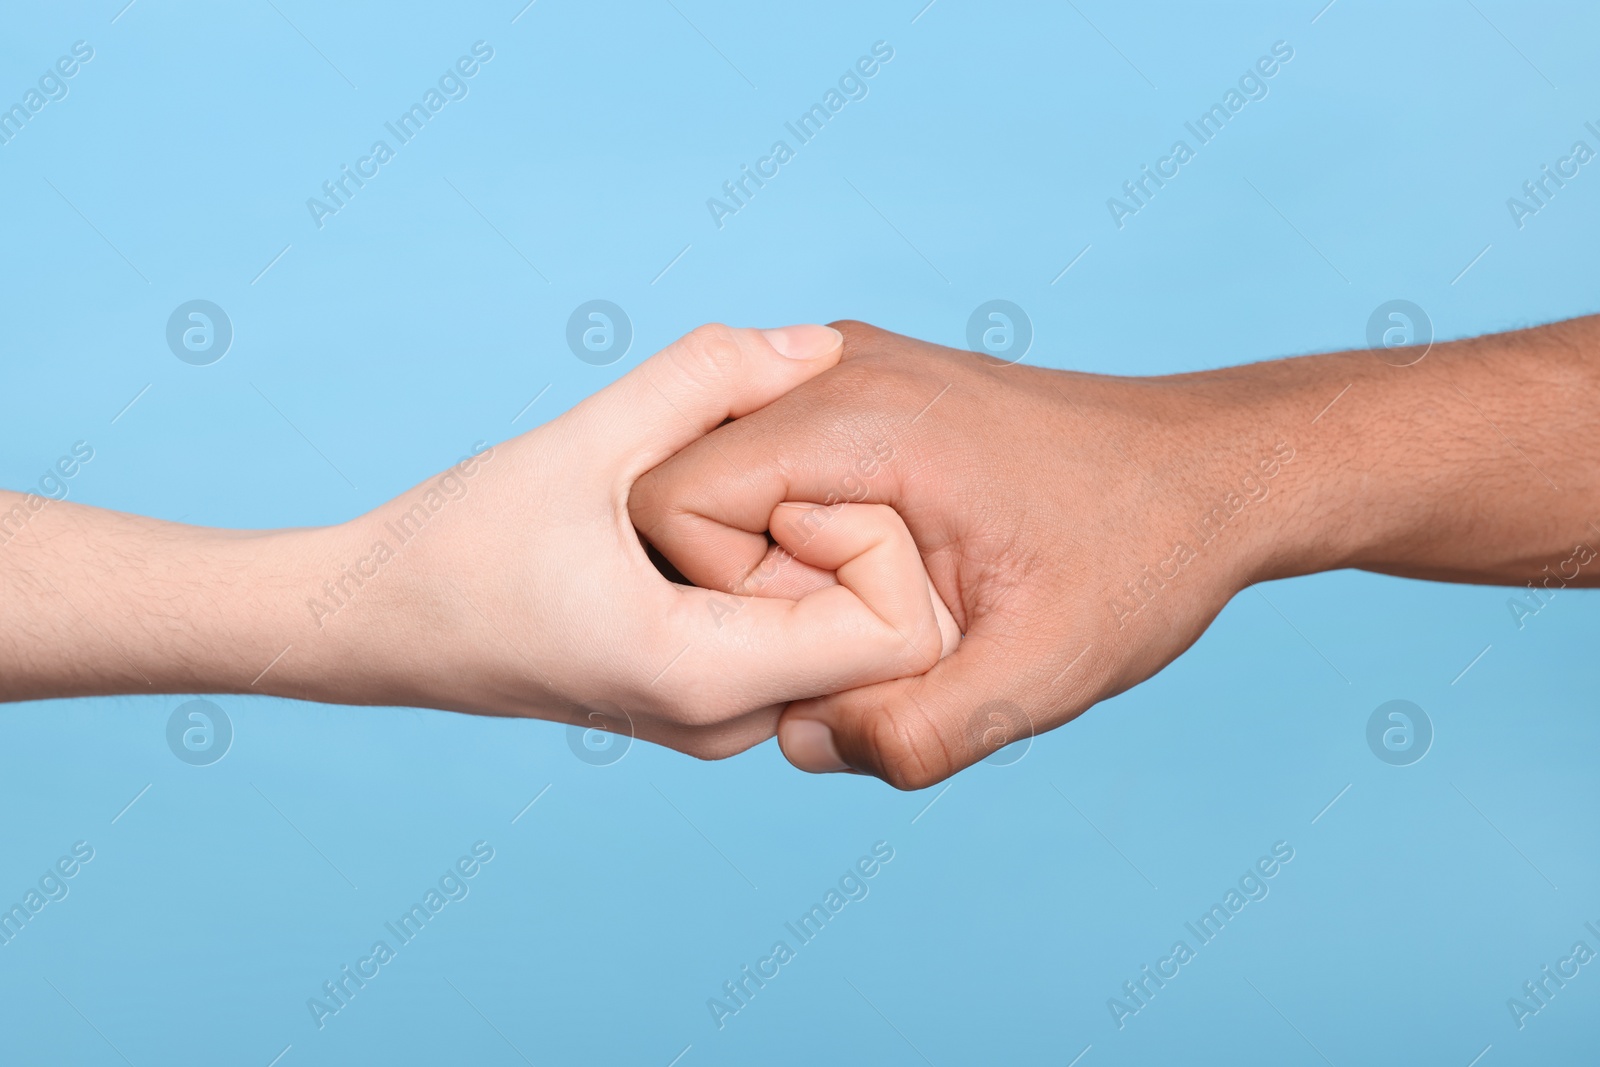 Photo of International relationships. People strongly joining hands on light blue background, closeup